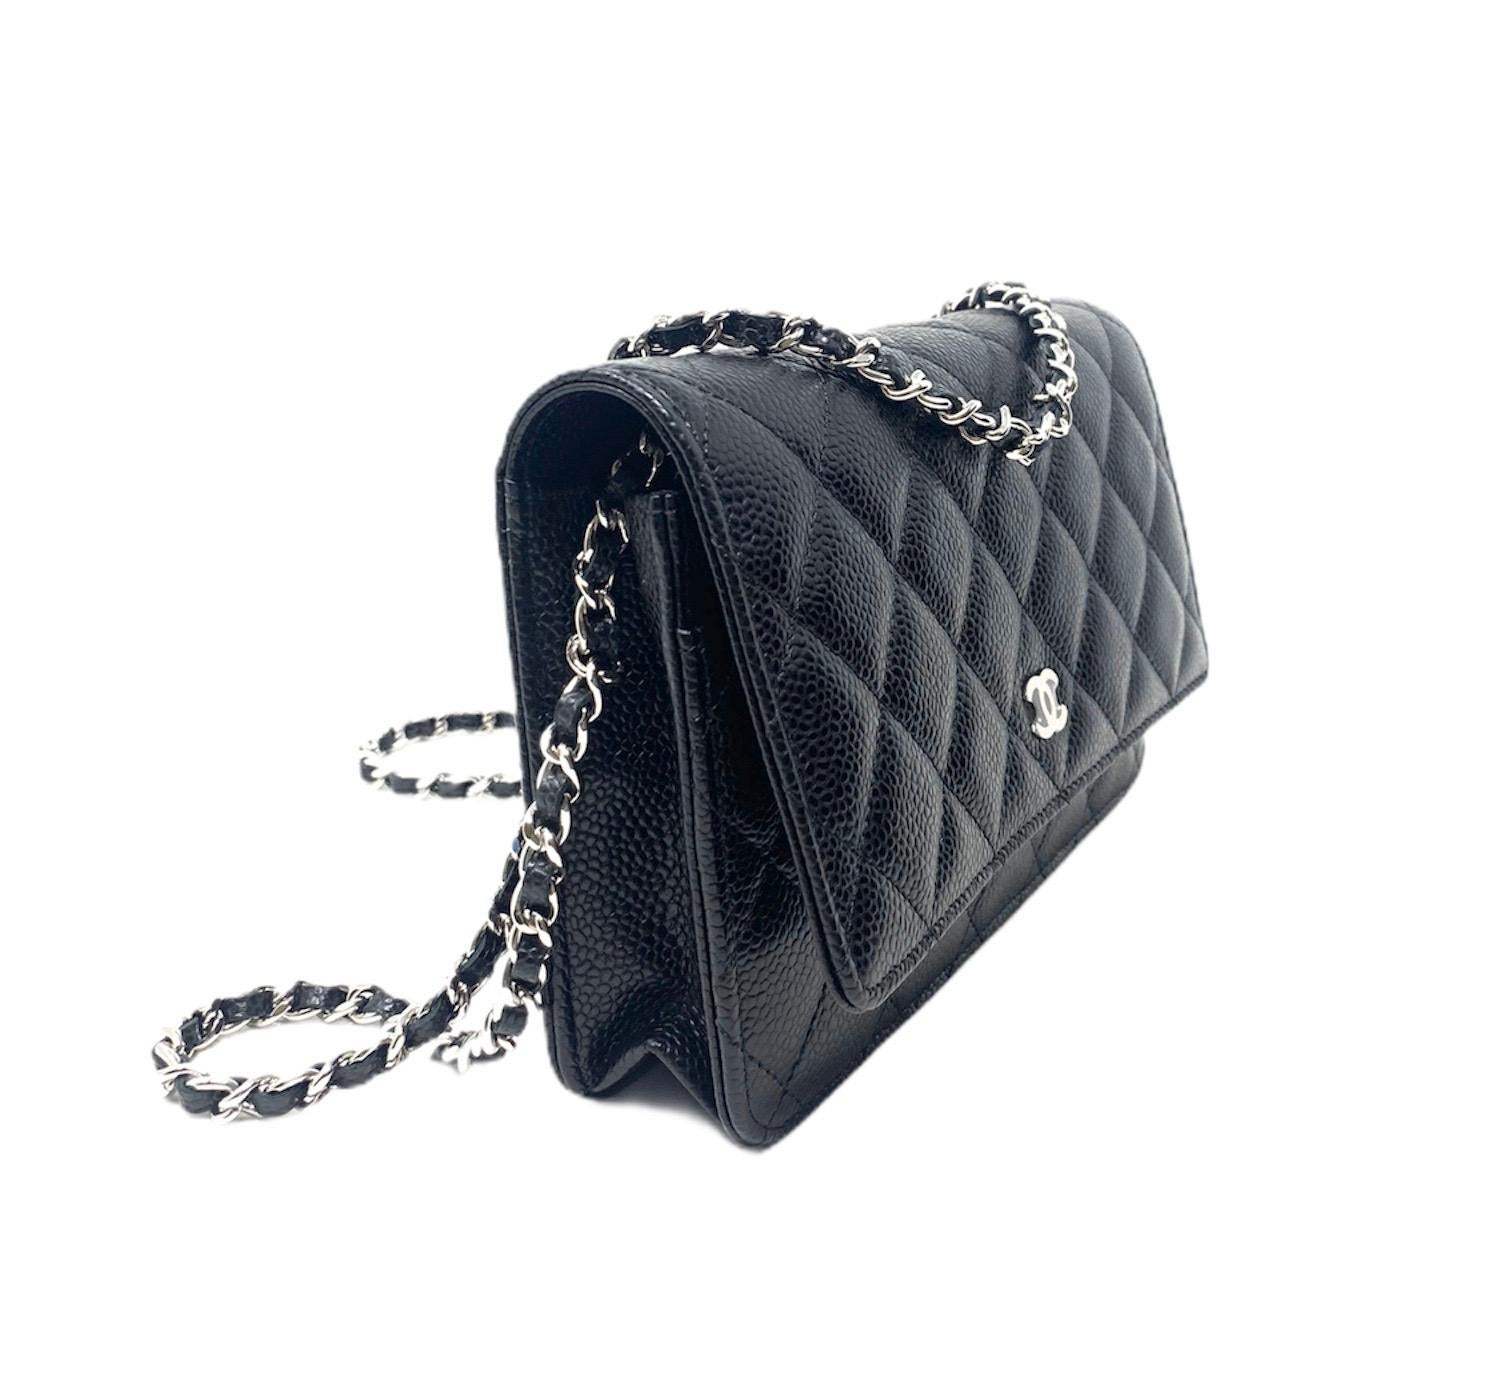 Wallet with Chanel Must-have model chain, comfortable and light to wear from evening and day.
The color is Black. The outside material is Leather. The pattern is Solid. This item is Contemporary.
 The year of manufacture would be 2019.
 Conditions &